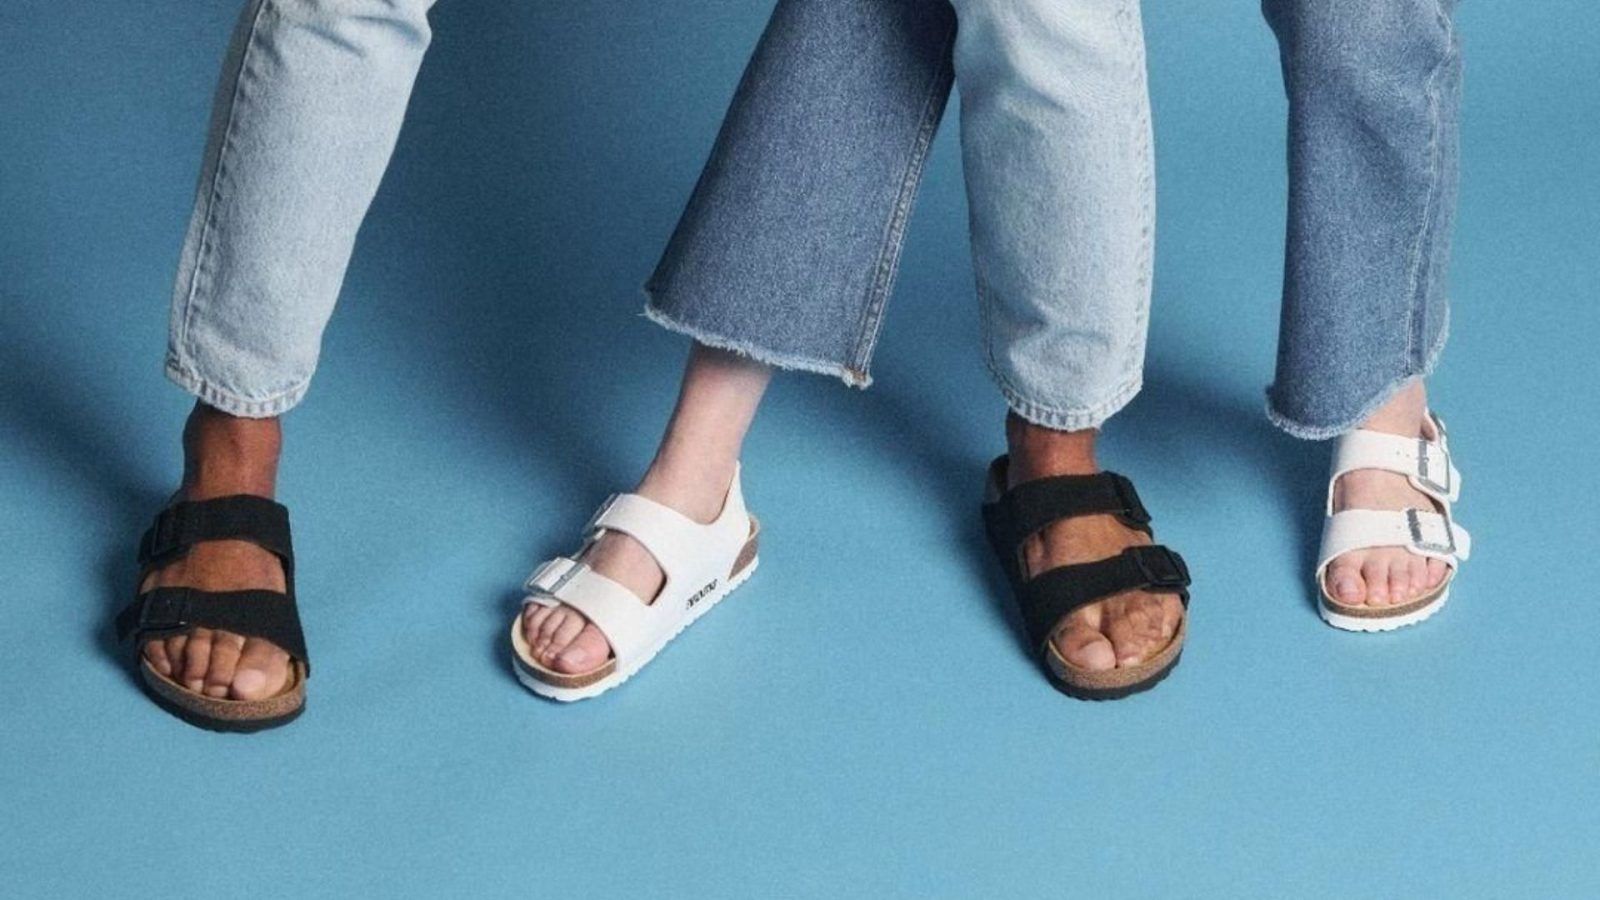 From Birkenstock to Yeezy: 10 sliders to add to your streetwear